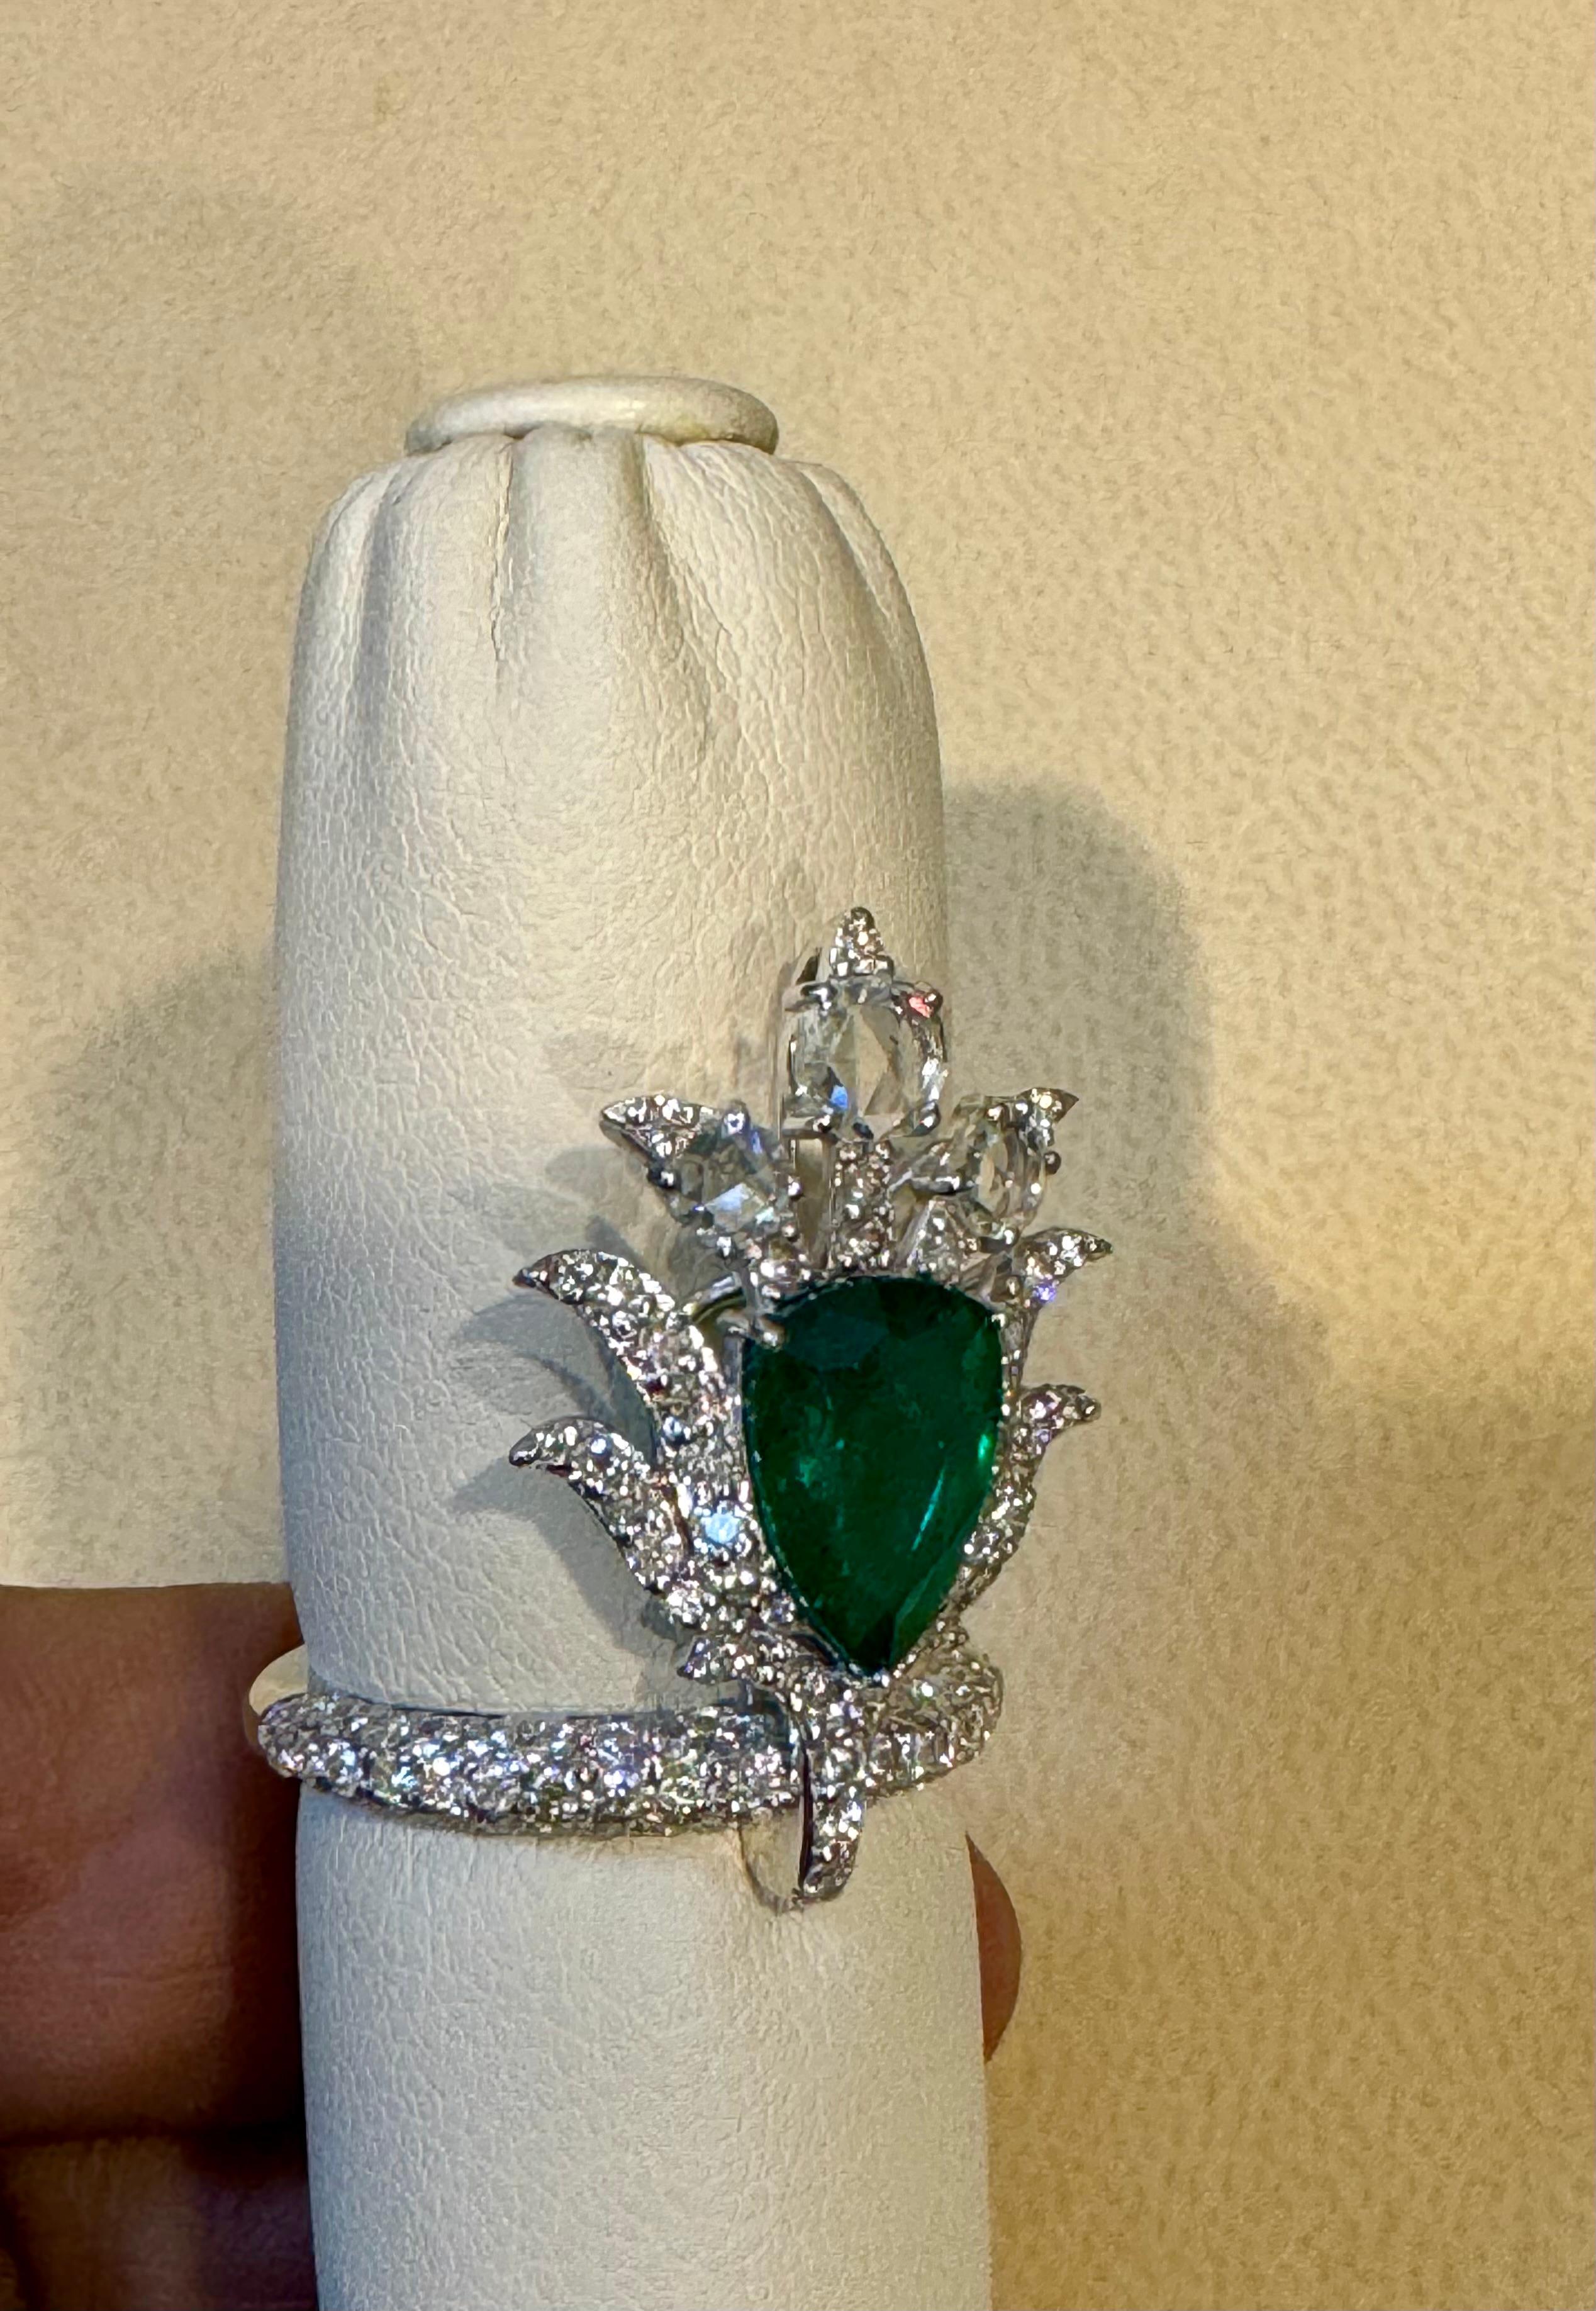 2 Ct Finest Zambian Pear Emerald & 2 Ct Diamond Ring in 18 Kt Gold Size 7 For Sale 5